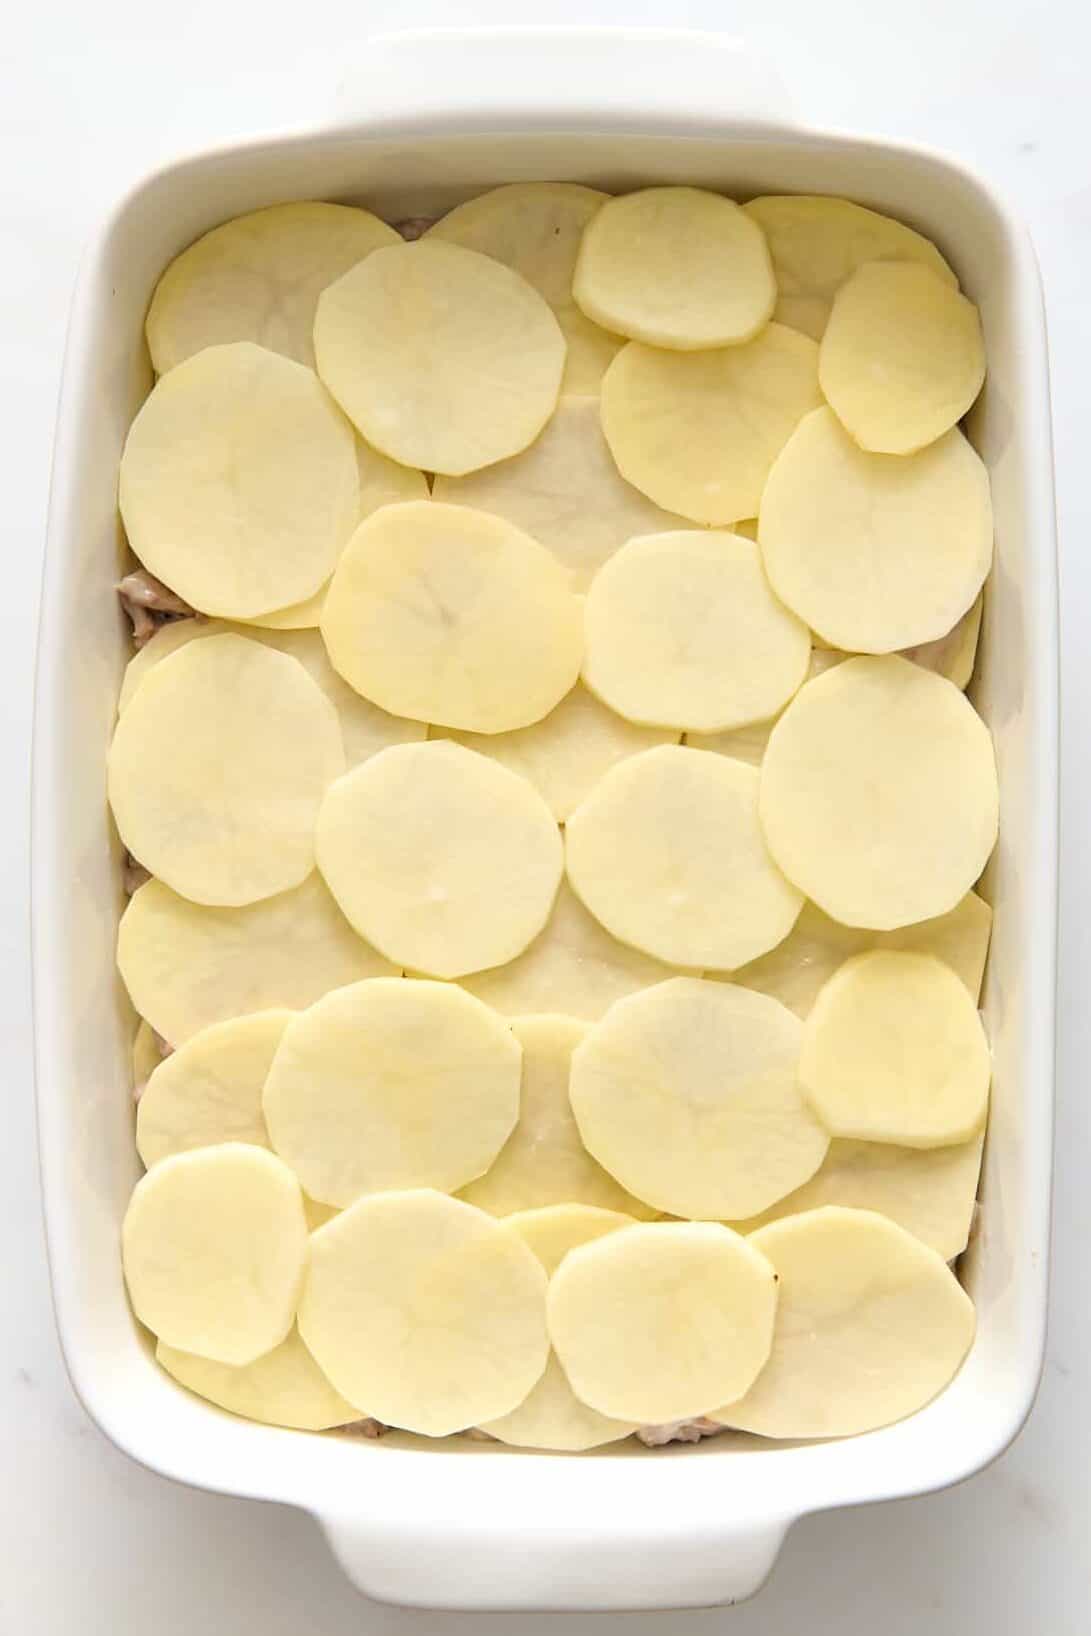 9x13 casserole dish with layered slices of potato. 